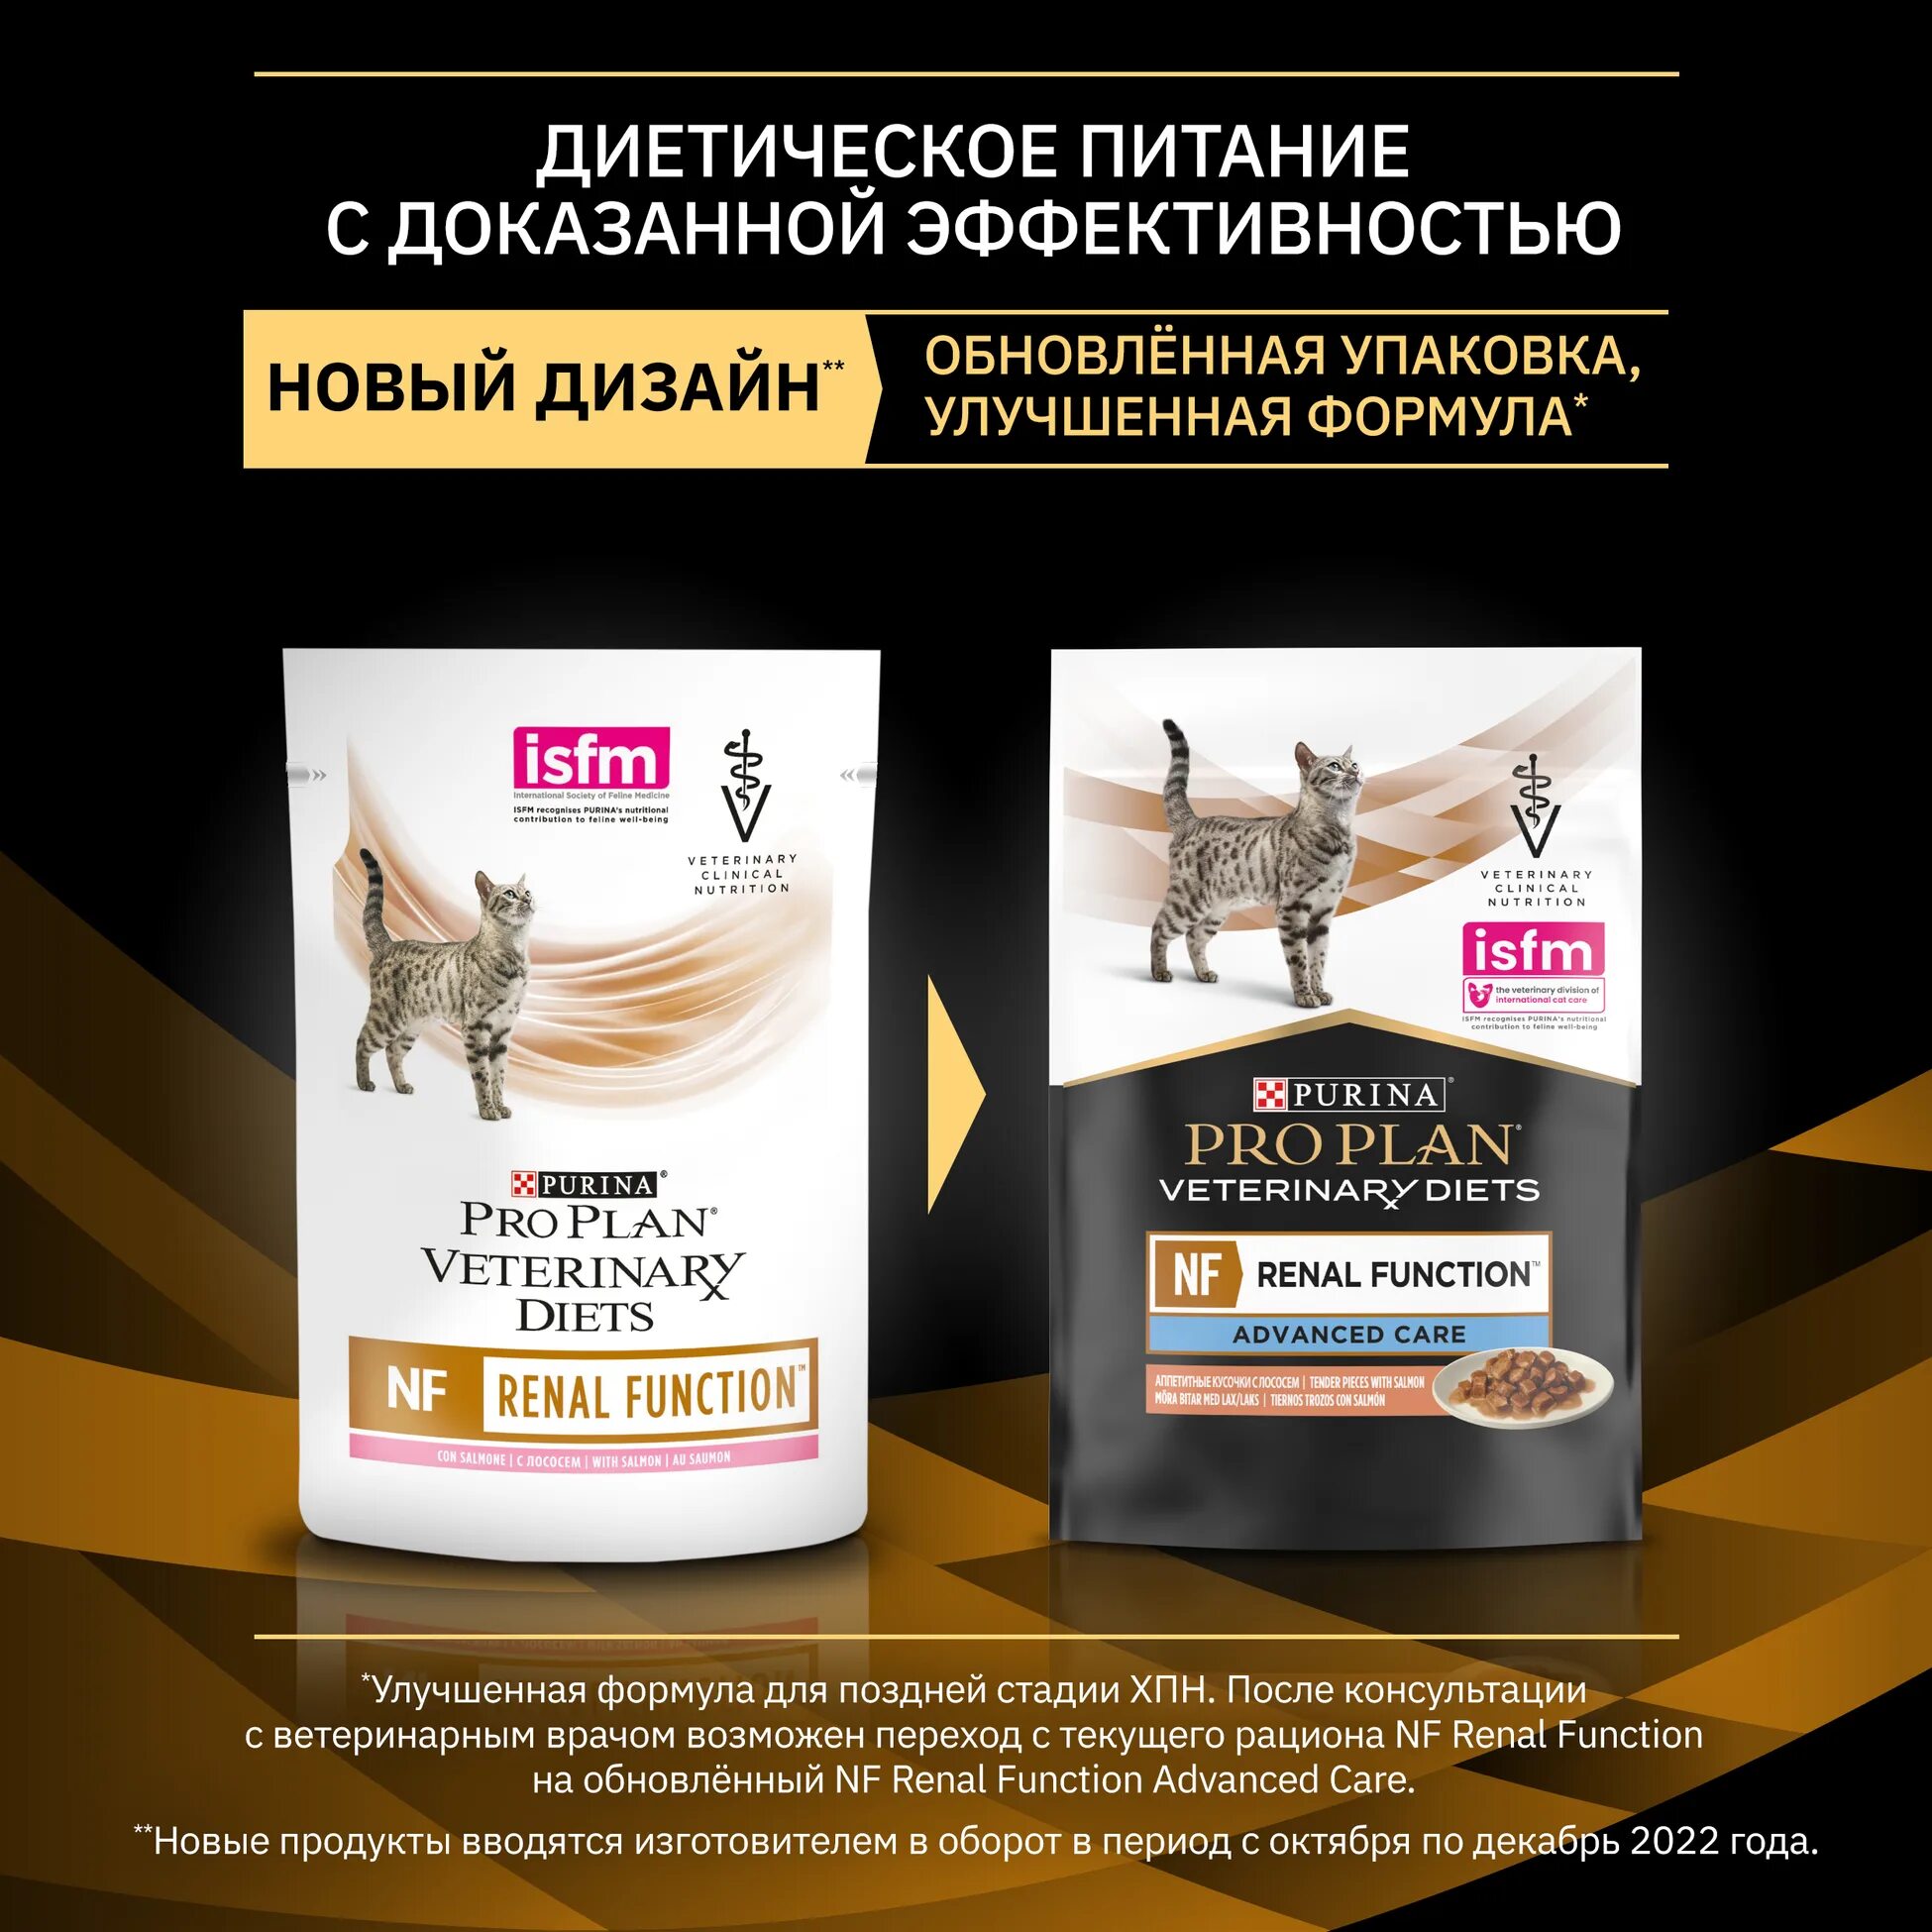 Pro Plan Veterinary Diets NF renal function. Pro Plan Veterinary Diets для кошек NF. Pro Plan Veterinary Diets renal function для кошек. Purina renal для кошек влажный.